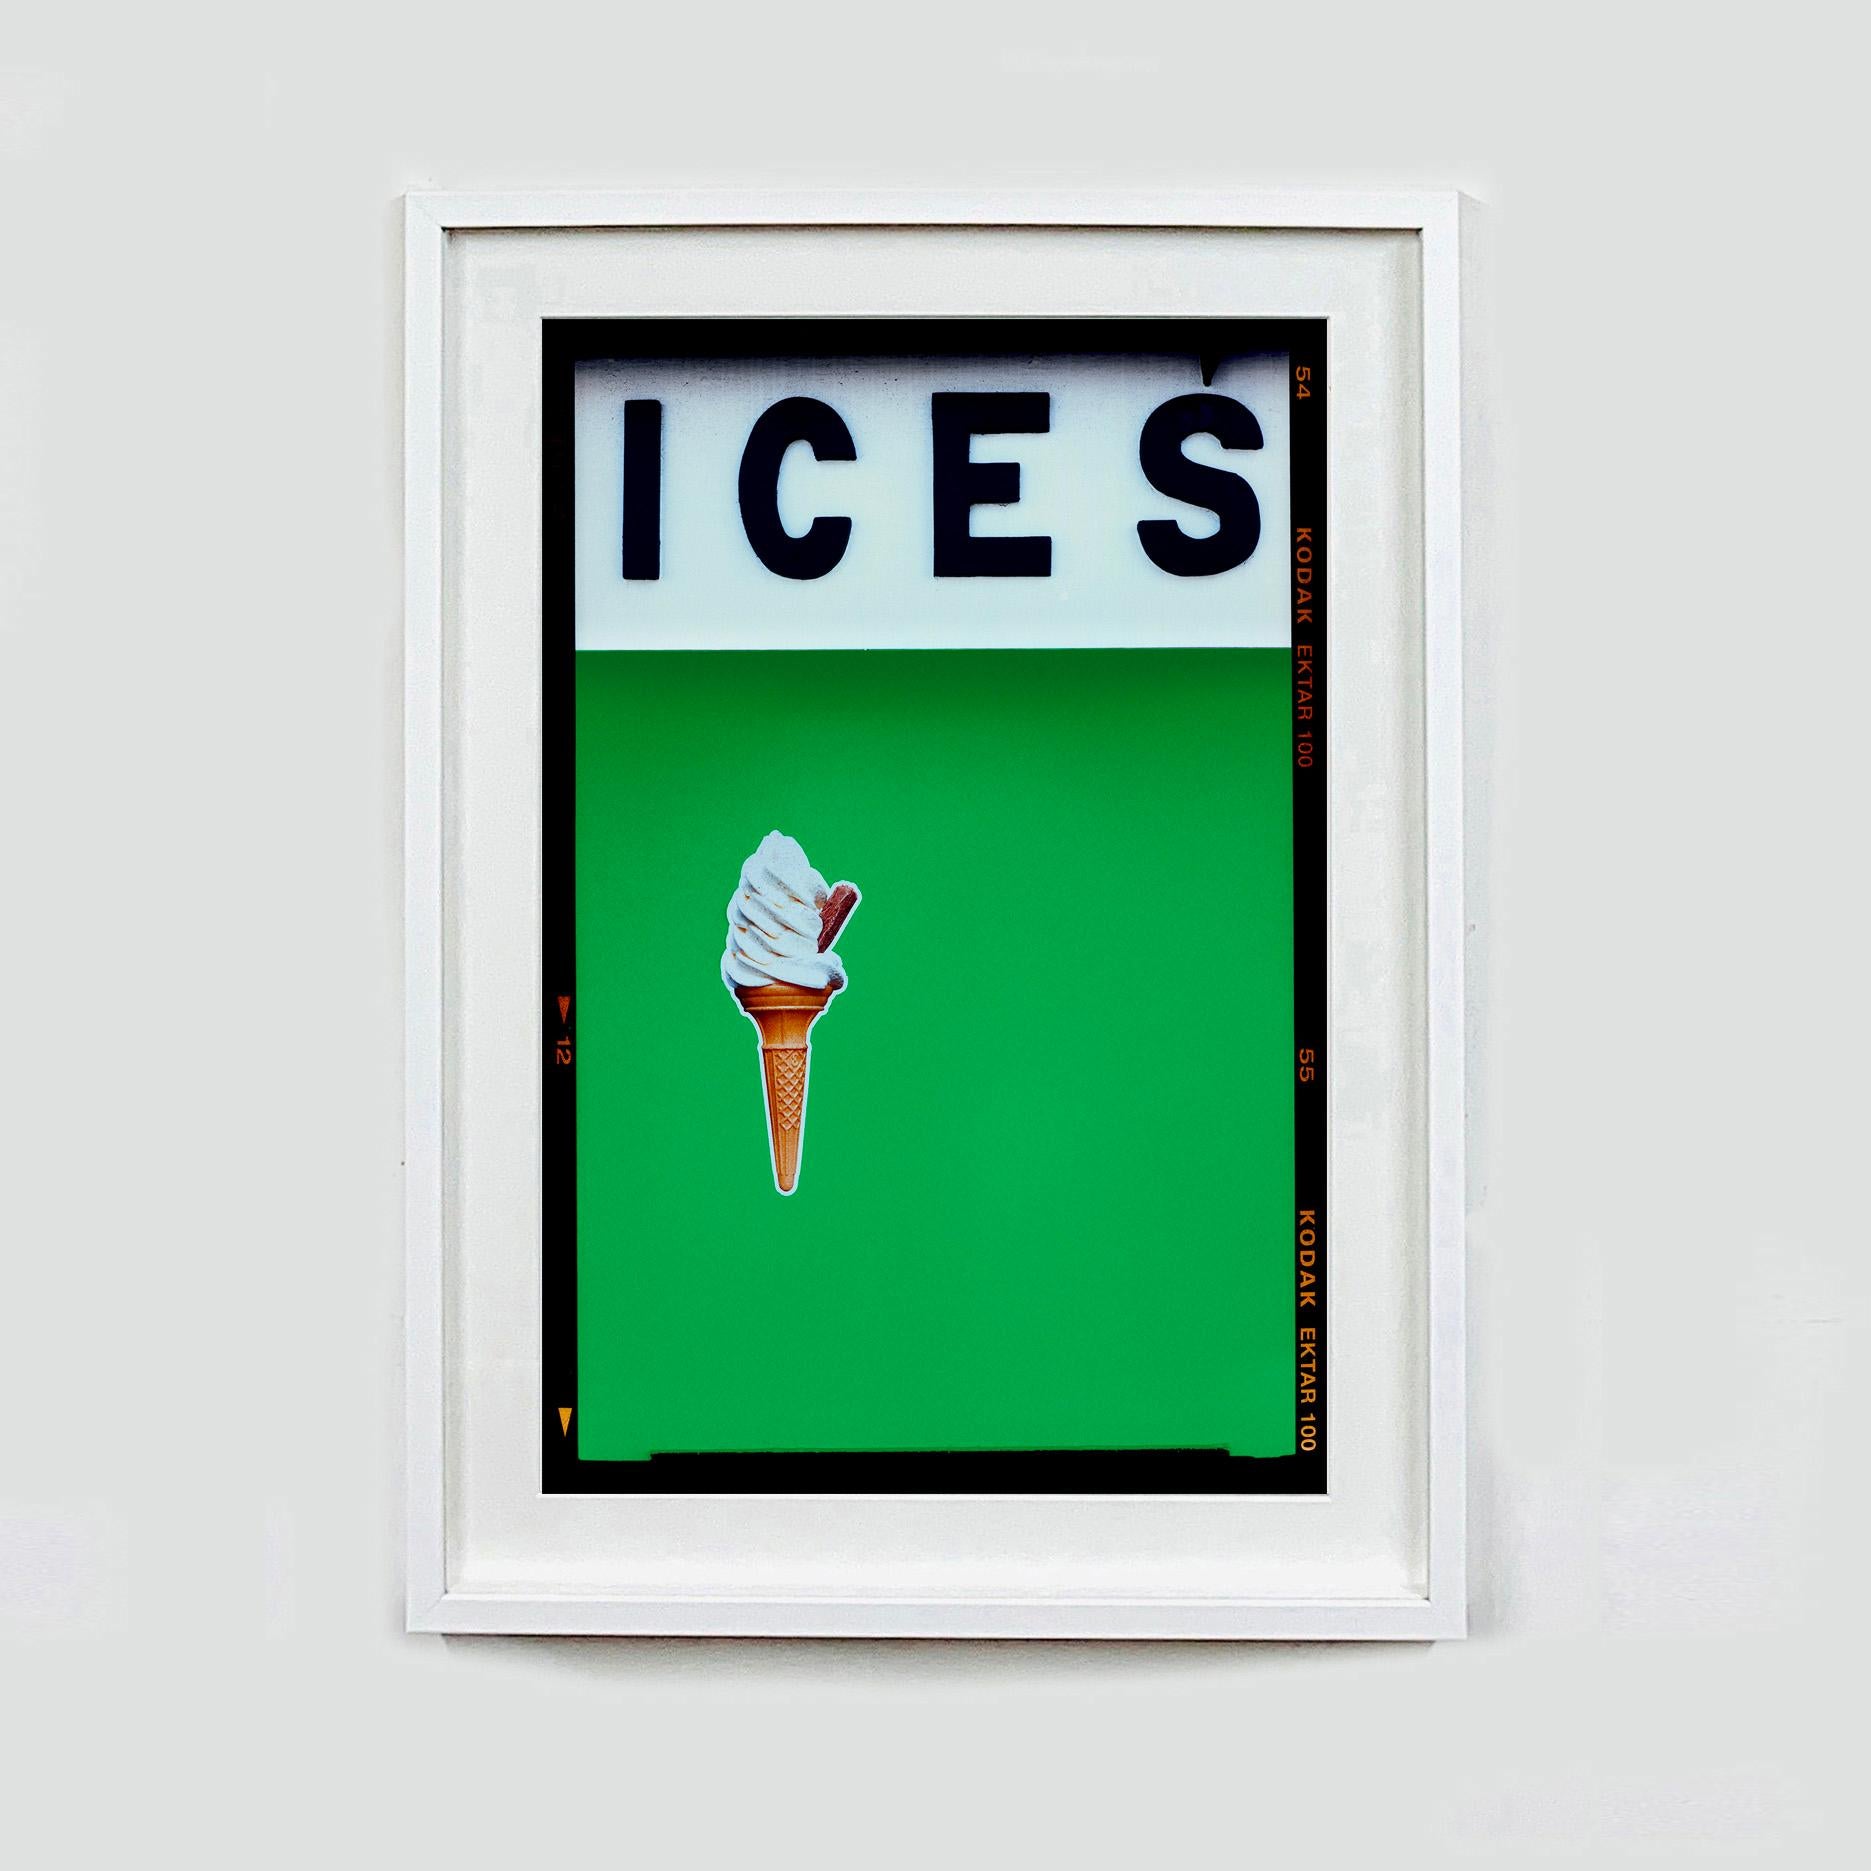 Ices (Green), Bexhill-on-Sea - British seaside color photography - Contemporary Photograph by Richard Heeps